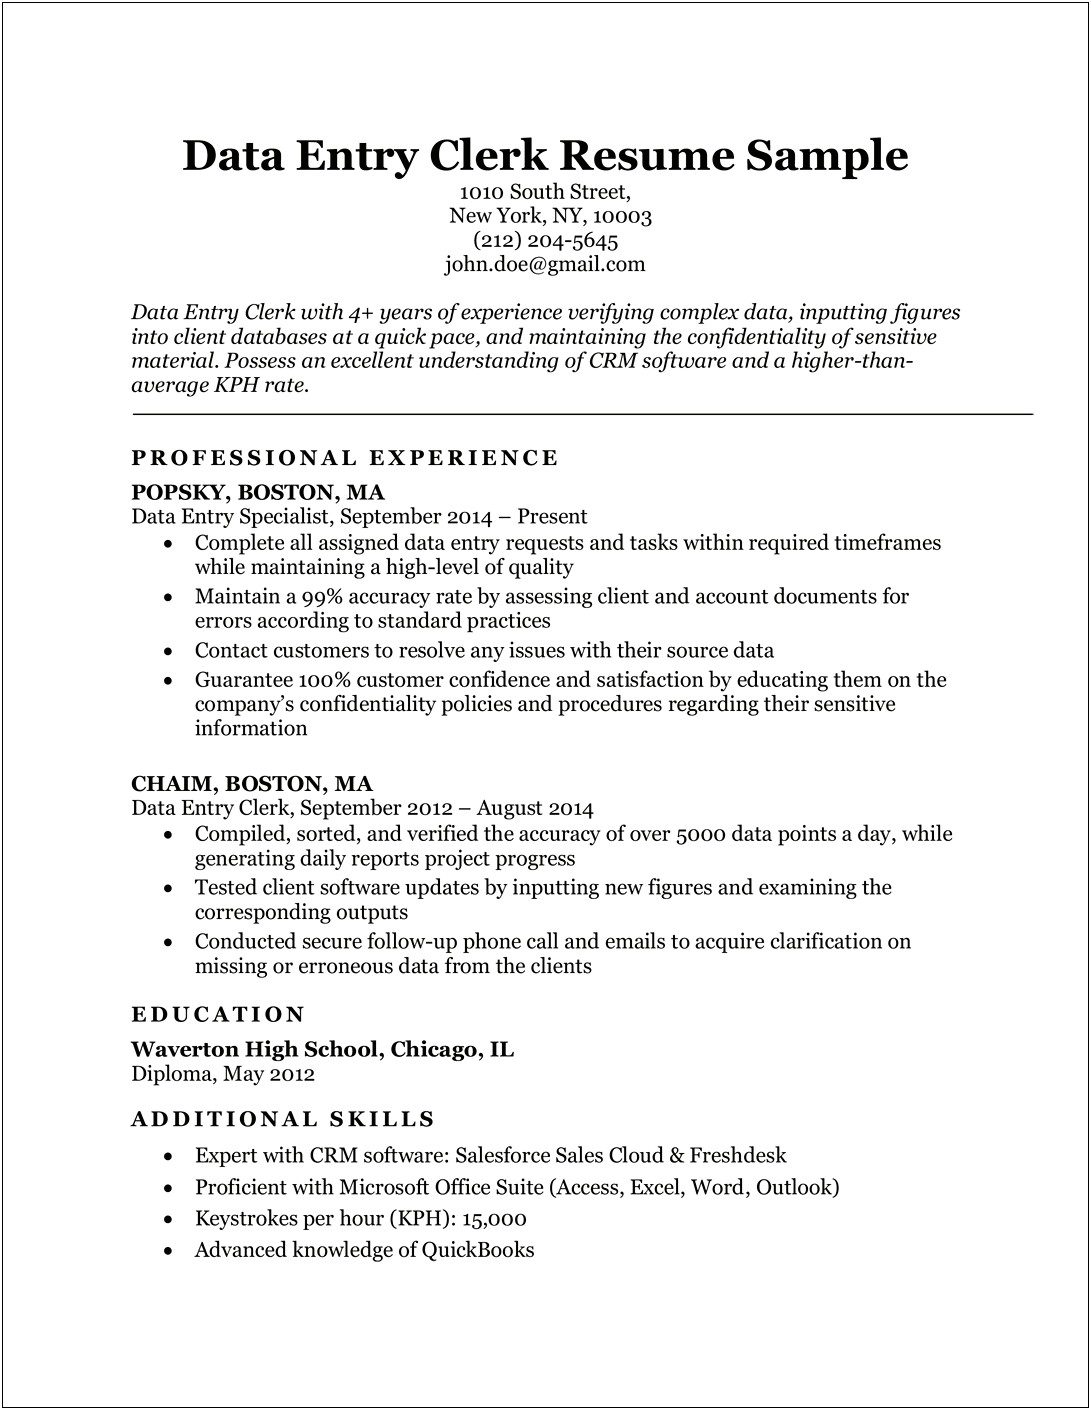 Nys Department Of Labor Skills Based Resume